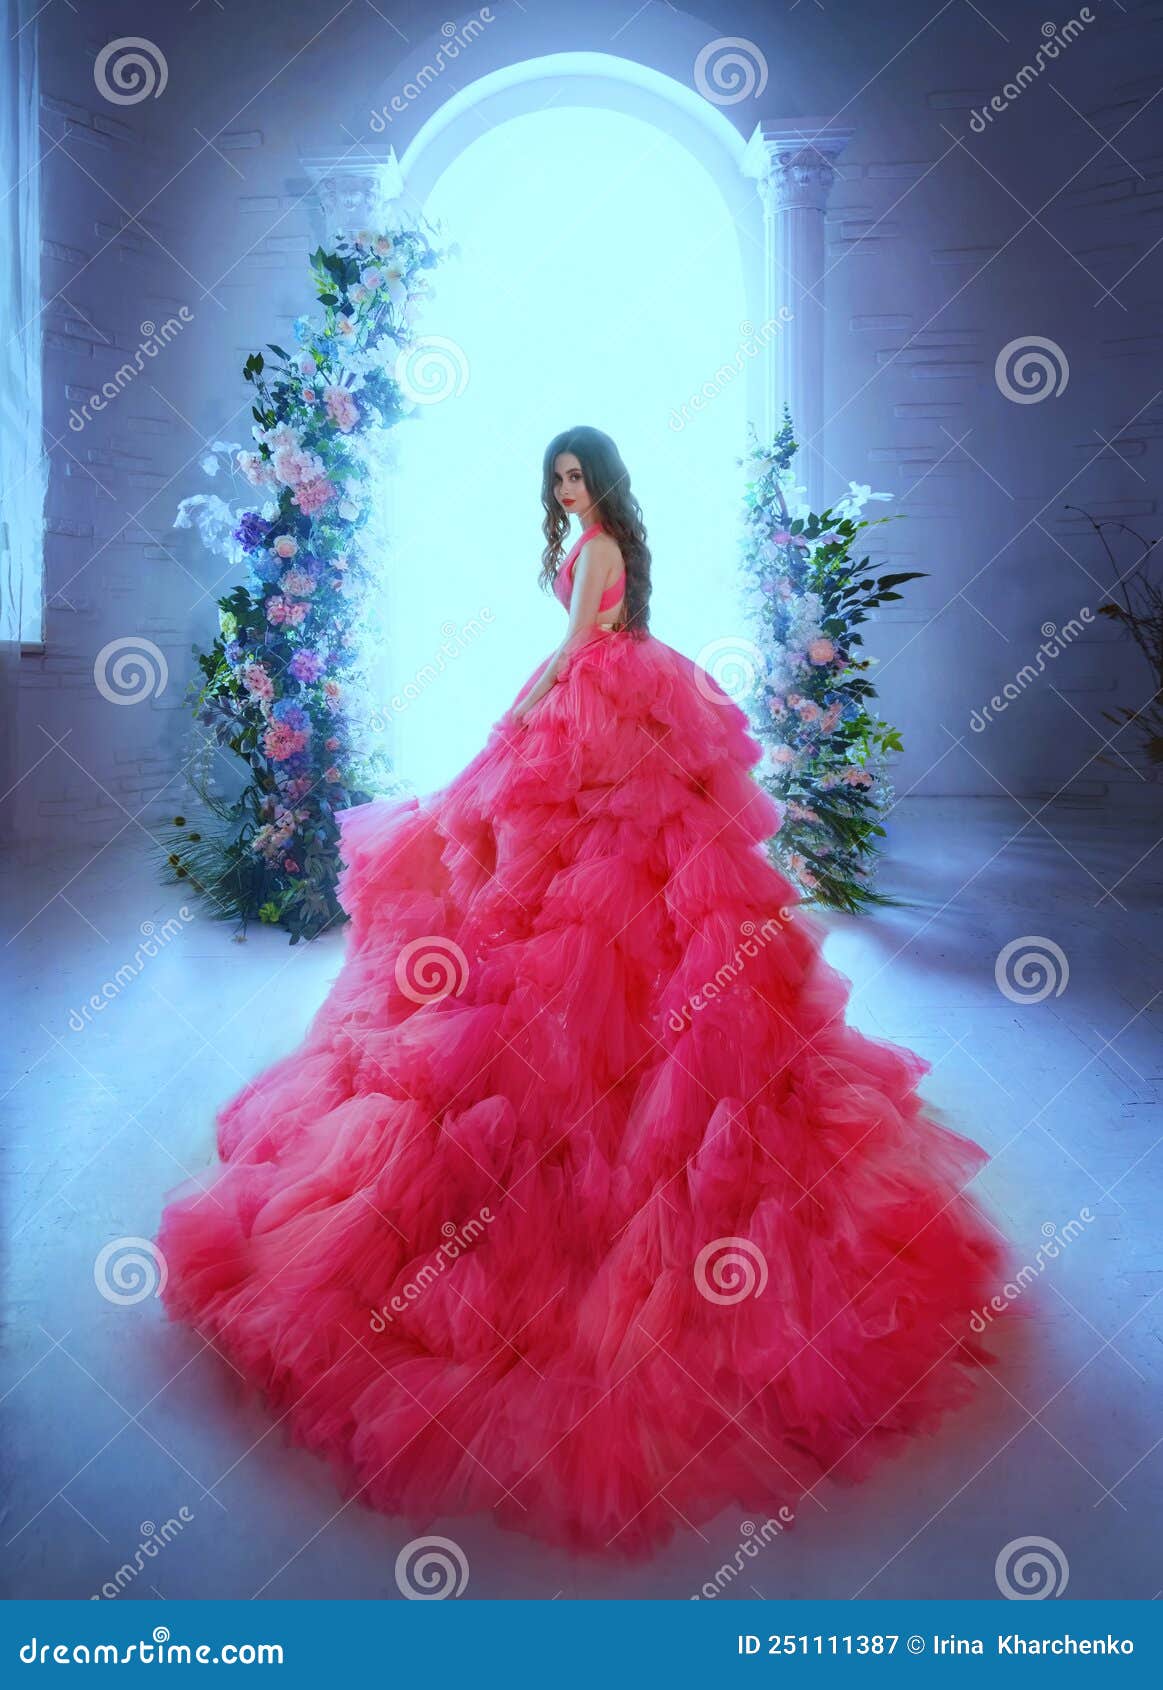 Magical Cinderella in Stunning Silver Gown | Enchanting Beauty | AI Art  Generator | Easy-Peasy.AI